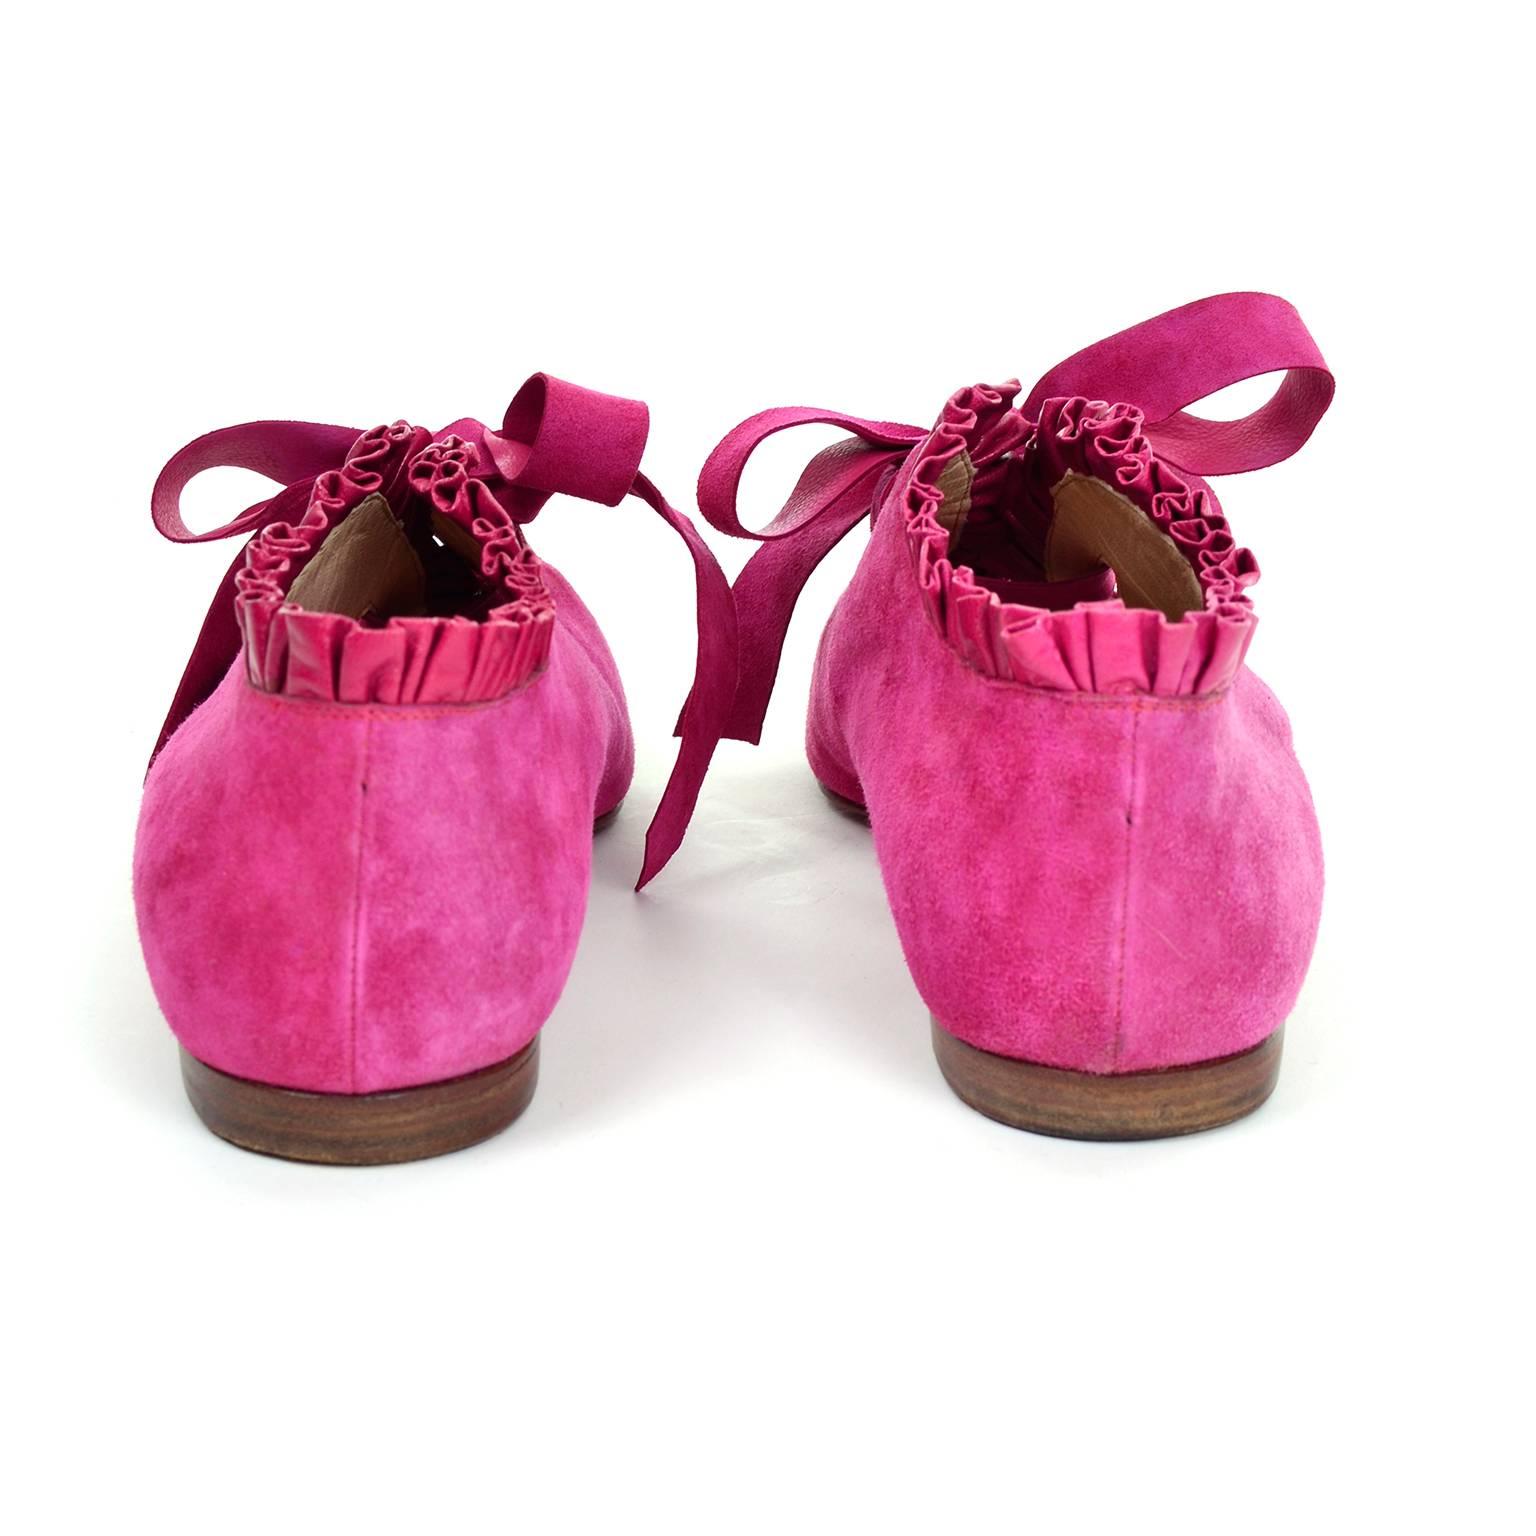 Women's Manolo Blahnik Hot Pink Suede Ruffled Lace Up Vintage Booties Size 38.5 US 8.5